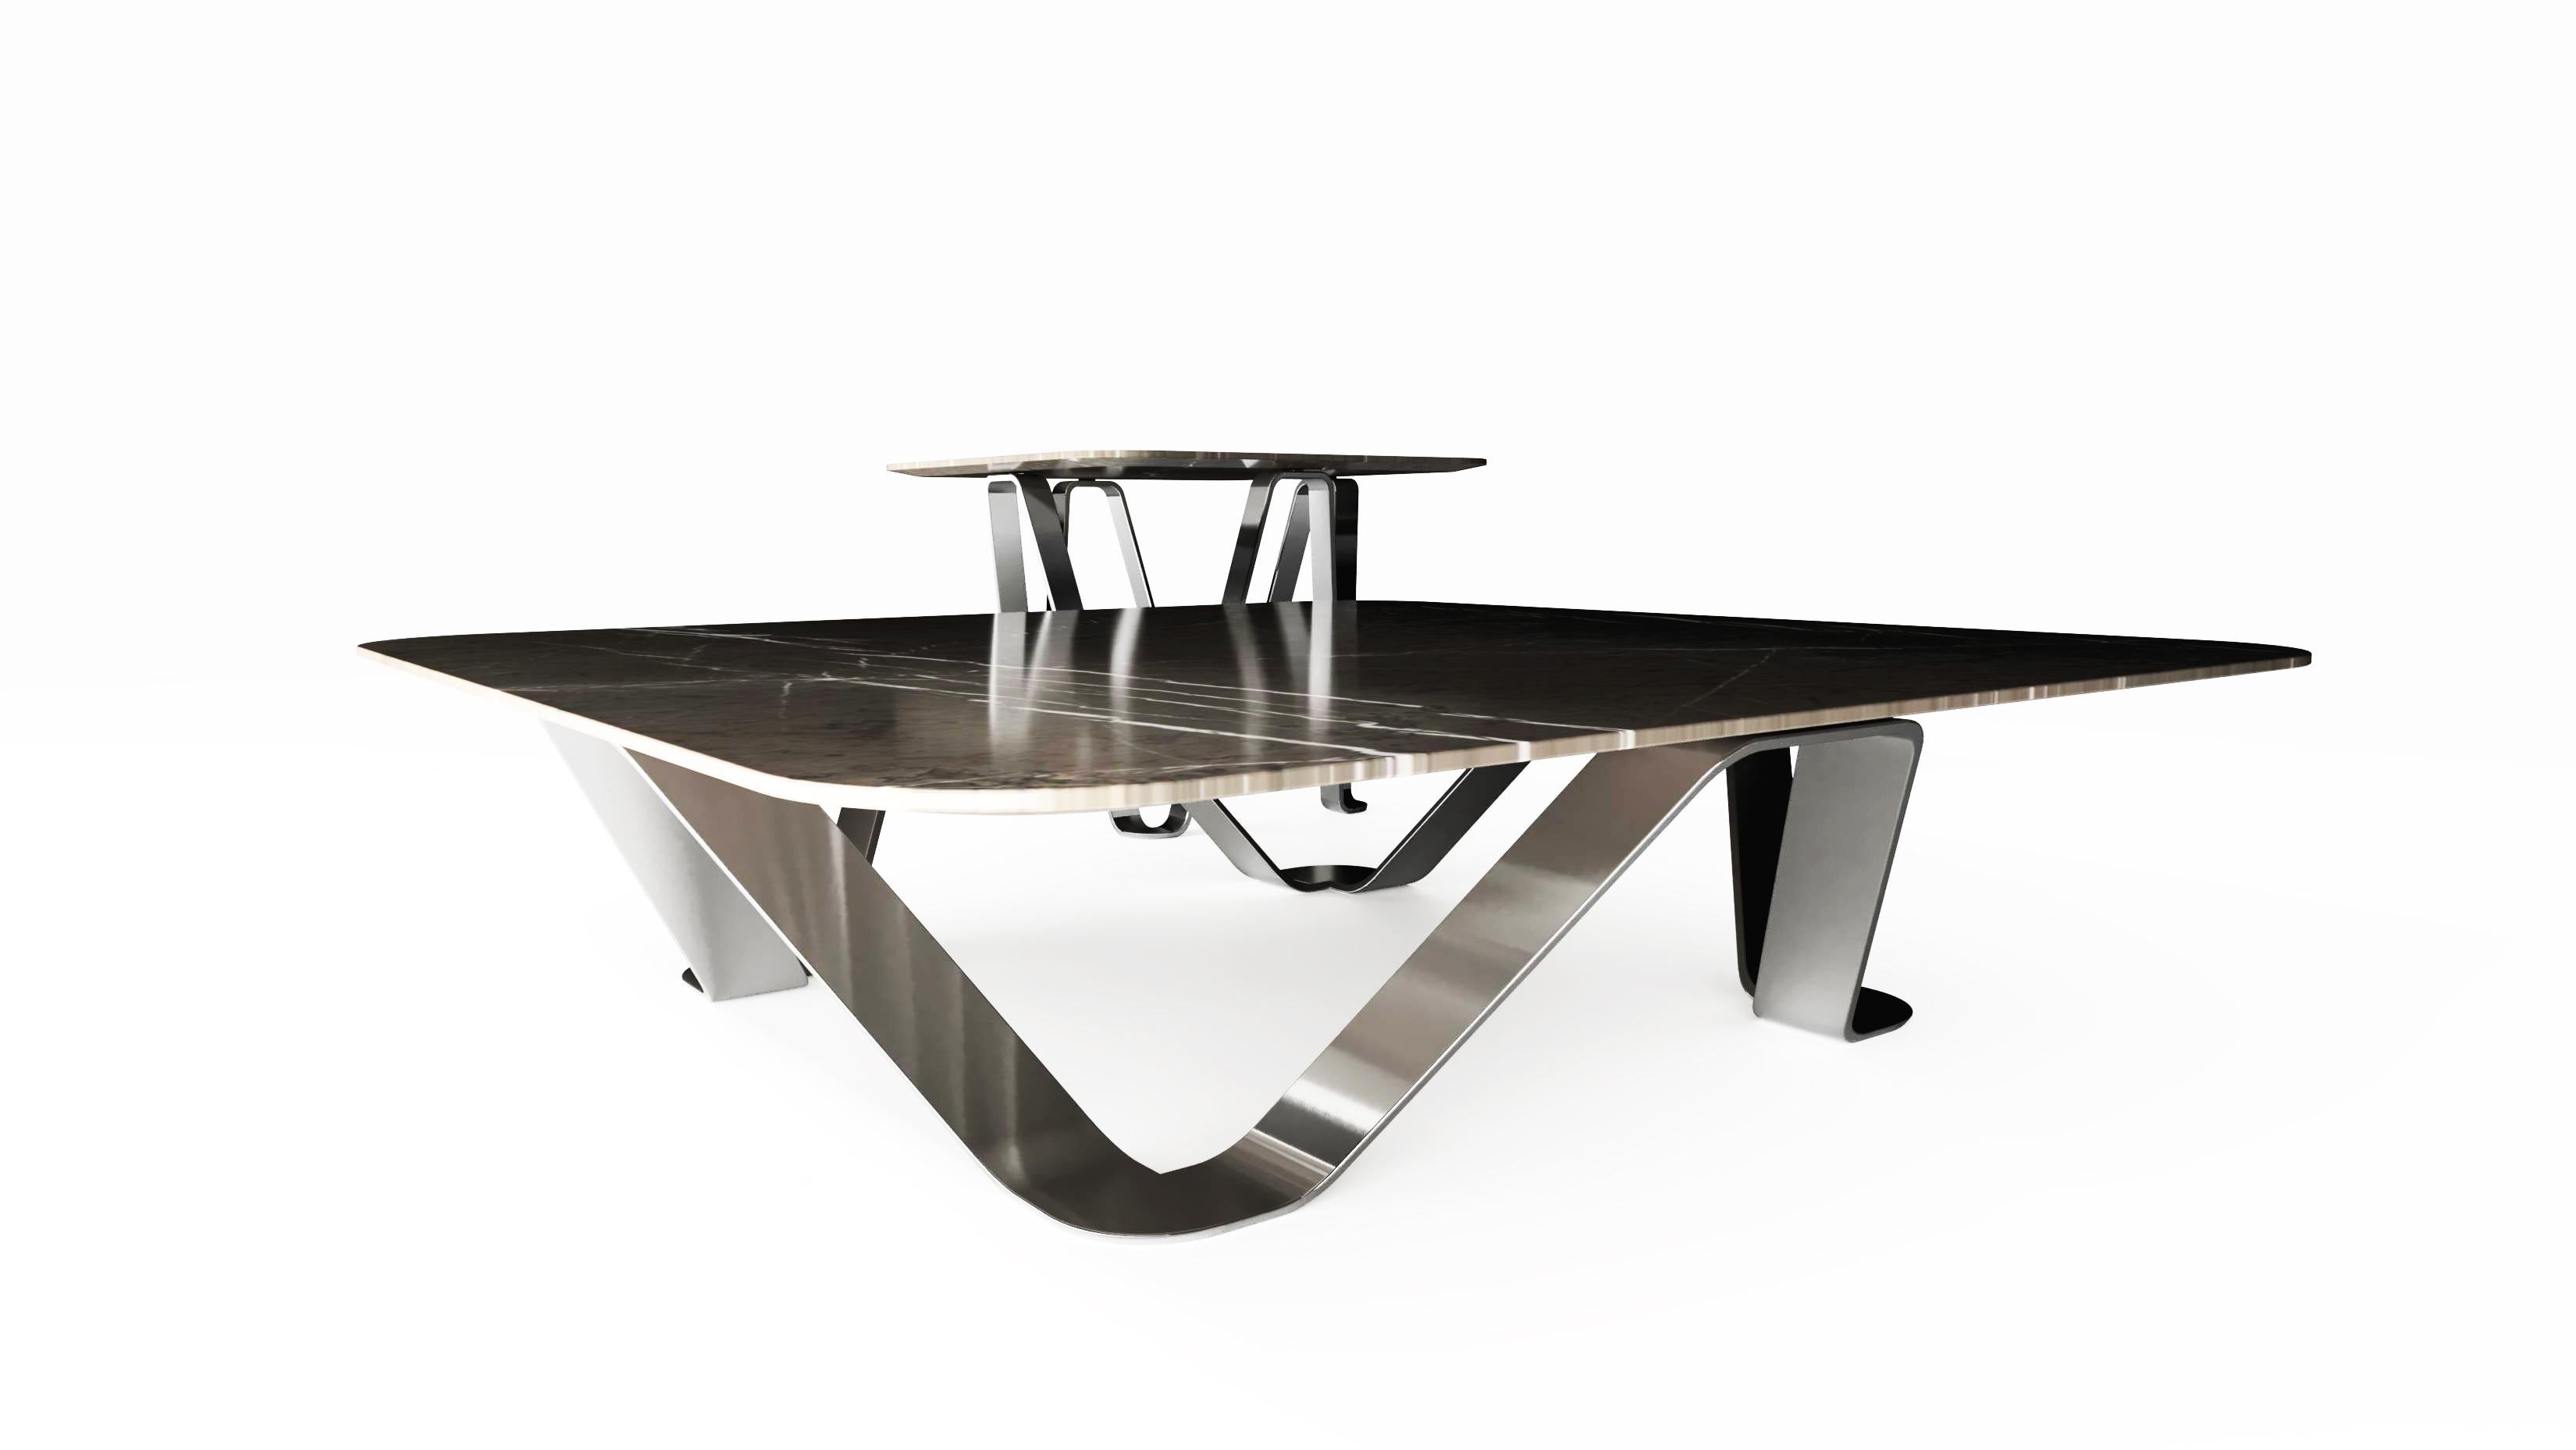 The Sinusoid centre table by Grzegorz Majka, 2021
Dimensions: 51.18 x 51.18 x 13.78 in
Materials: marble, steel

There are ups and downs in the lives of each of us. In the face of many obstacles we follow the sinusoid path. This unique centre